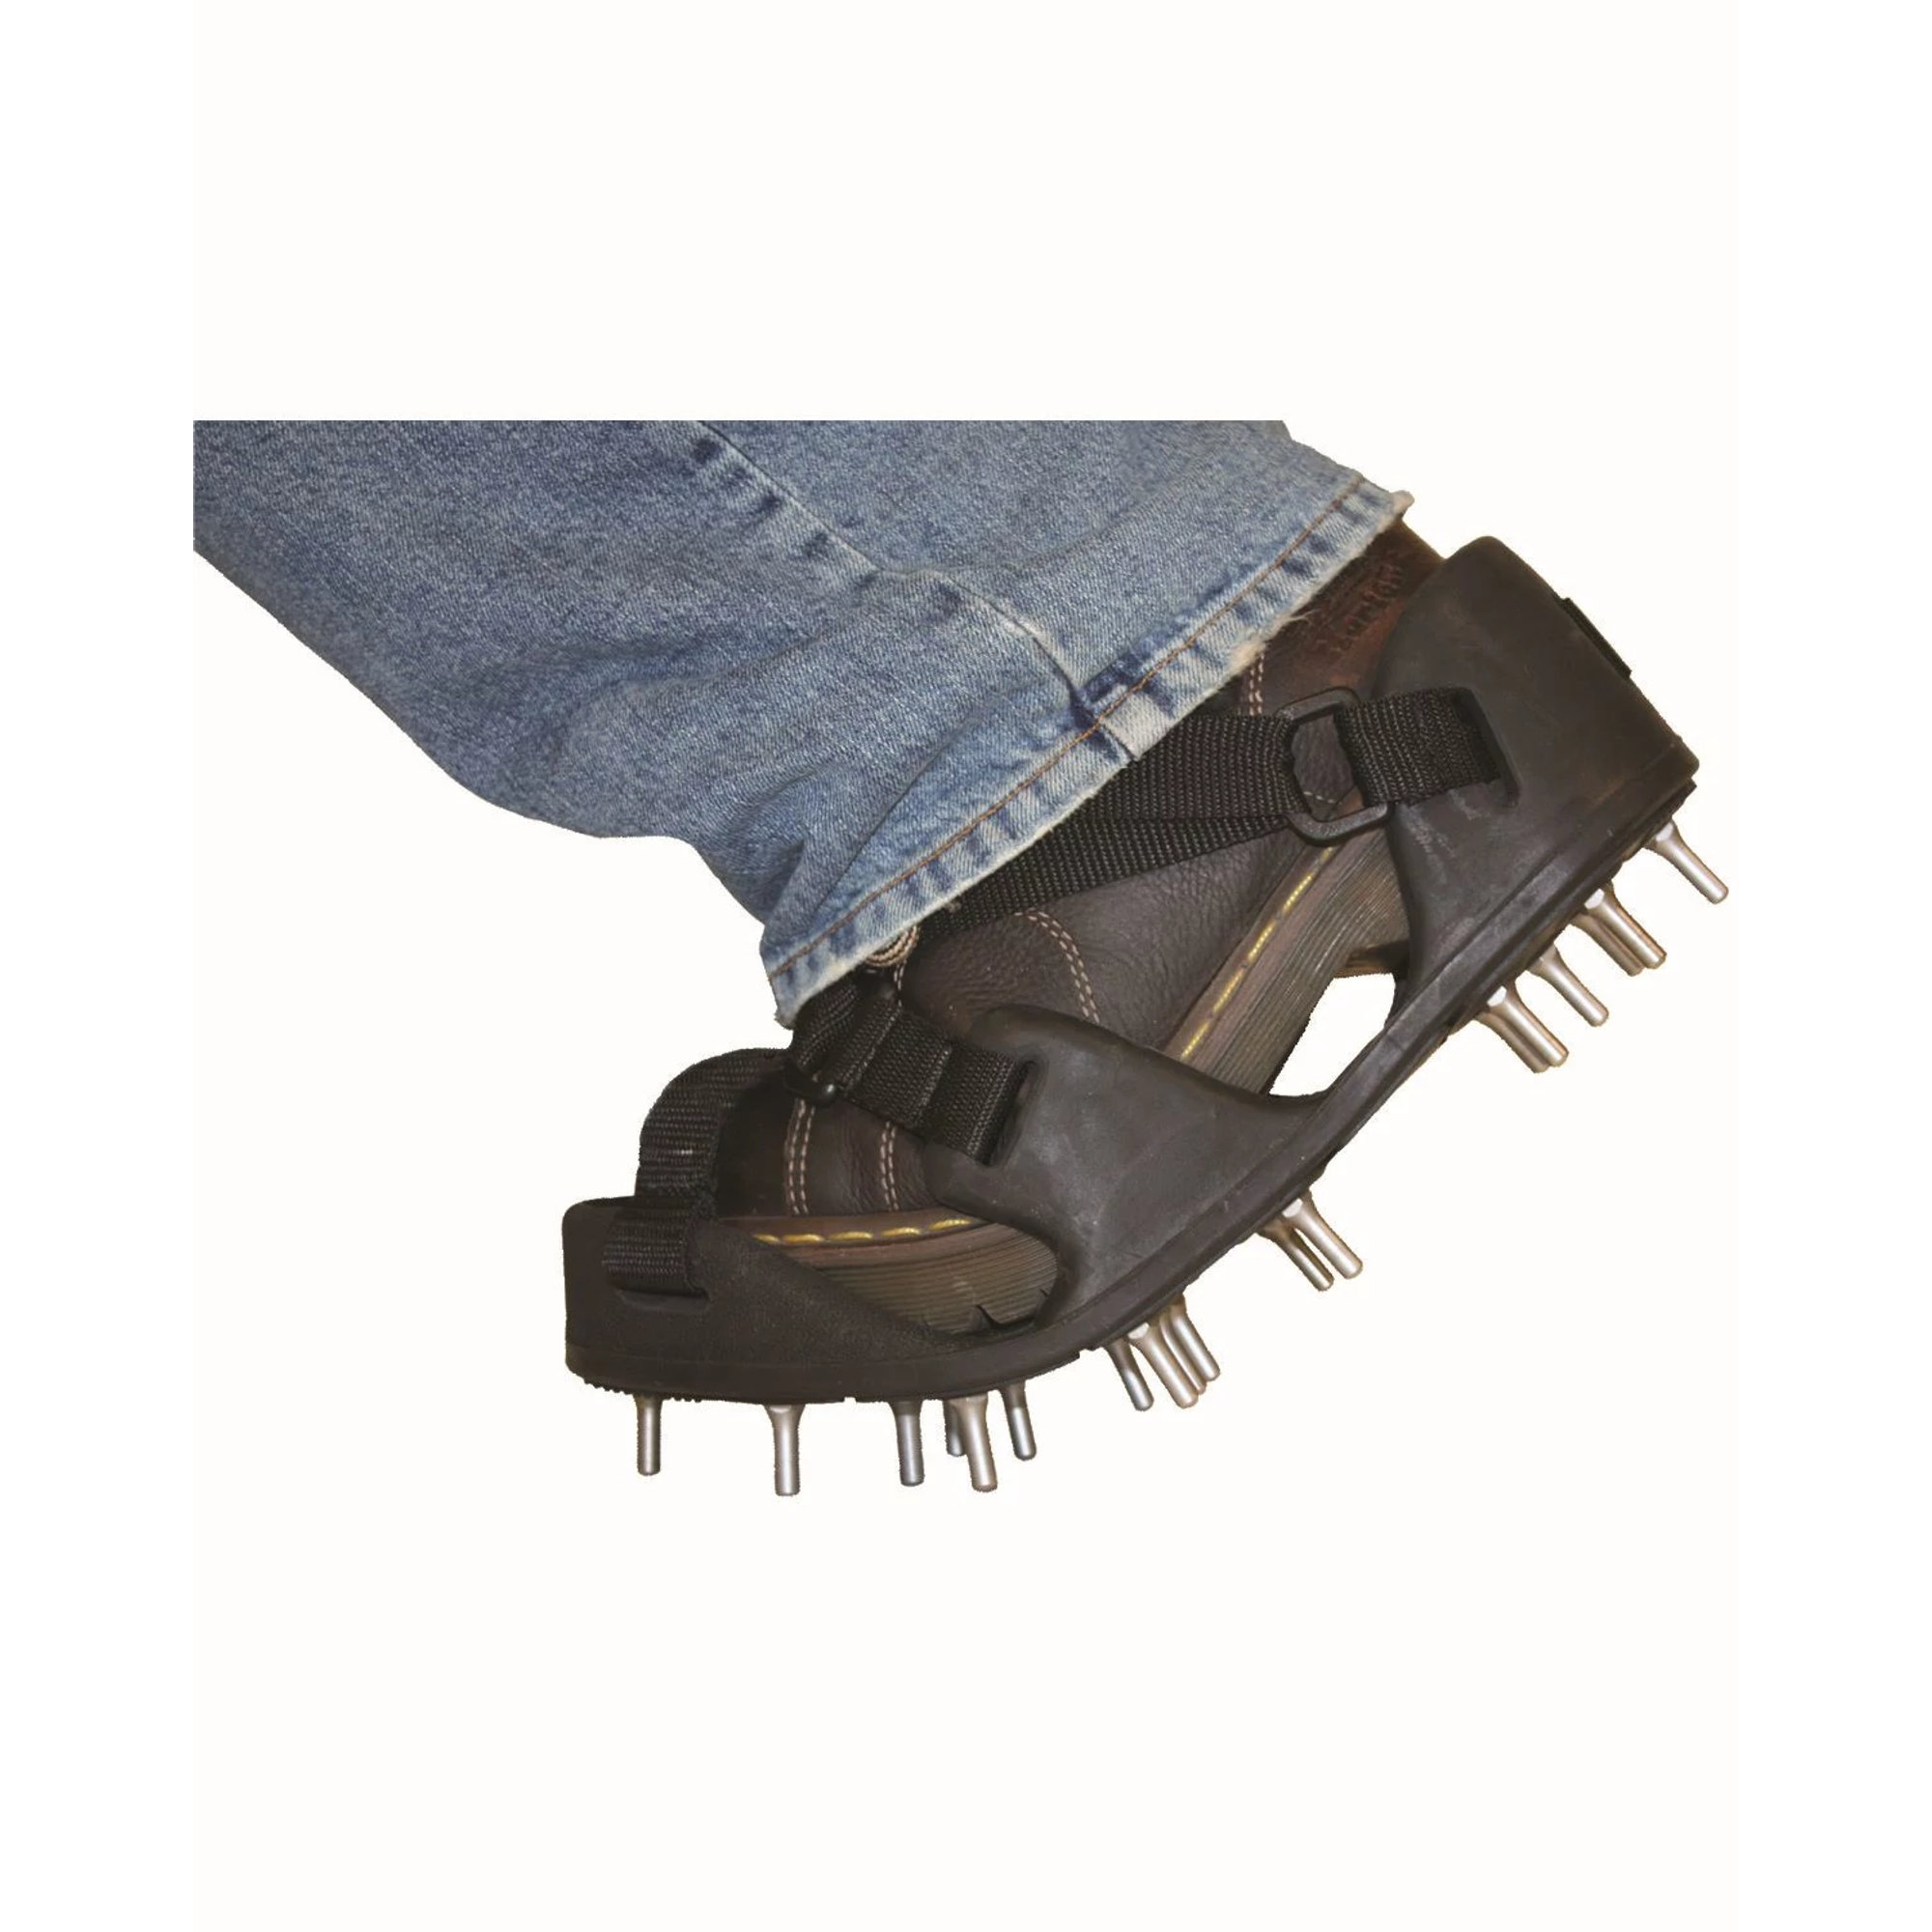 Seymour Midwest SureSpikes Spiked Shoes | Epoxy Spiked Shoes